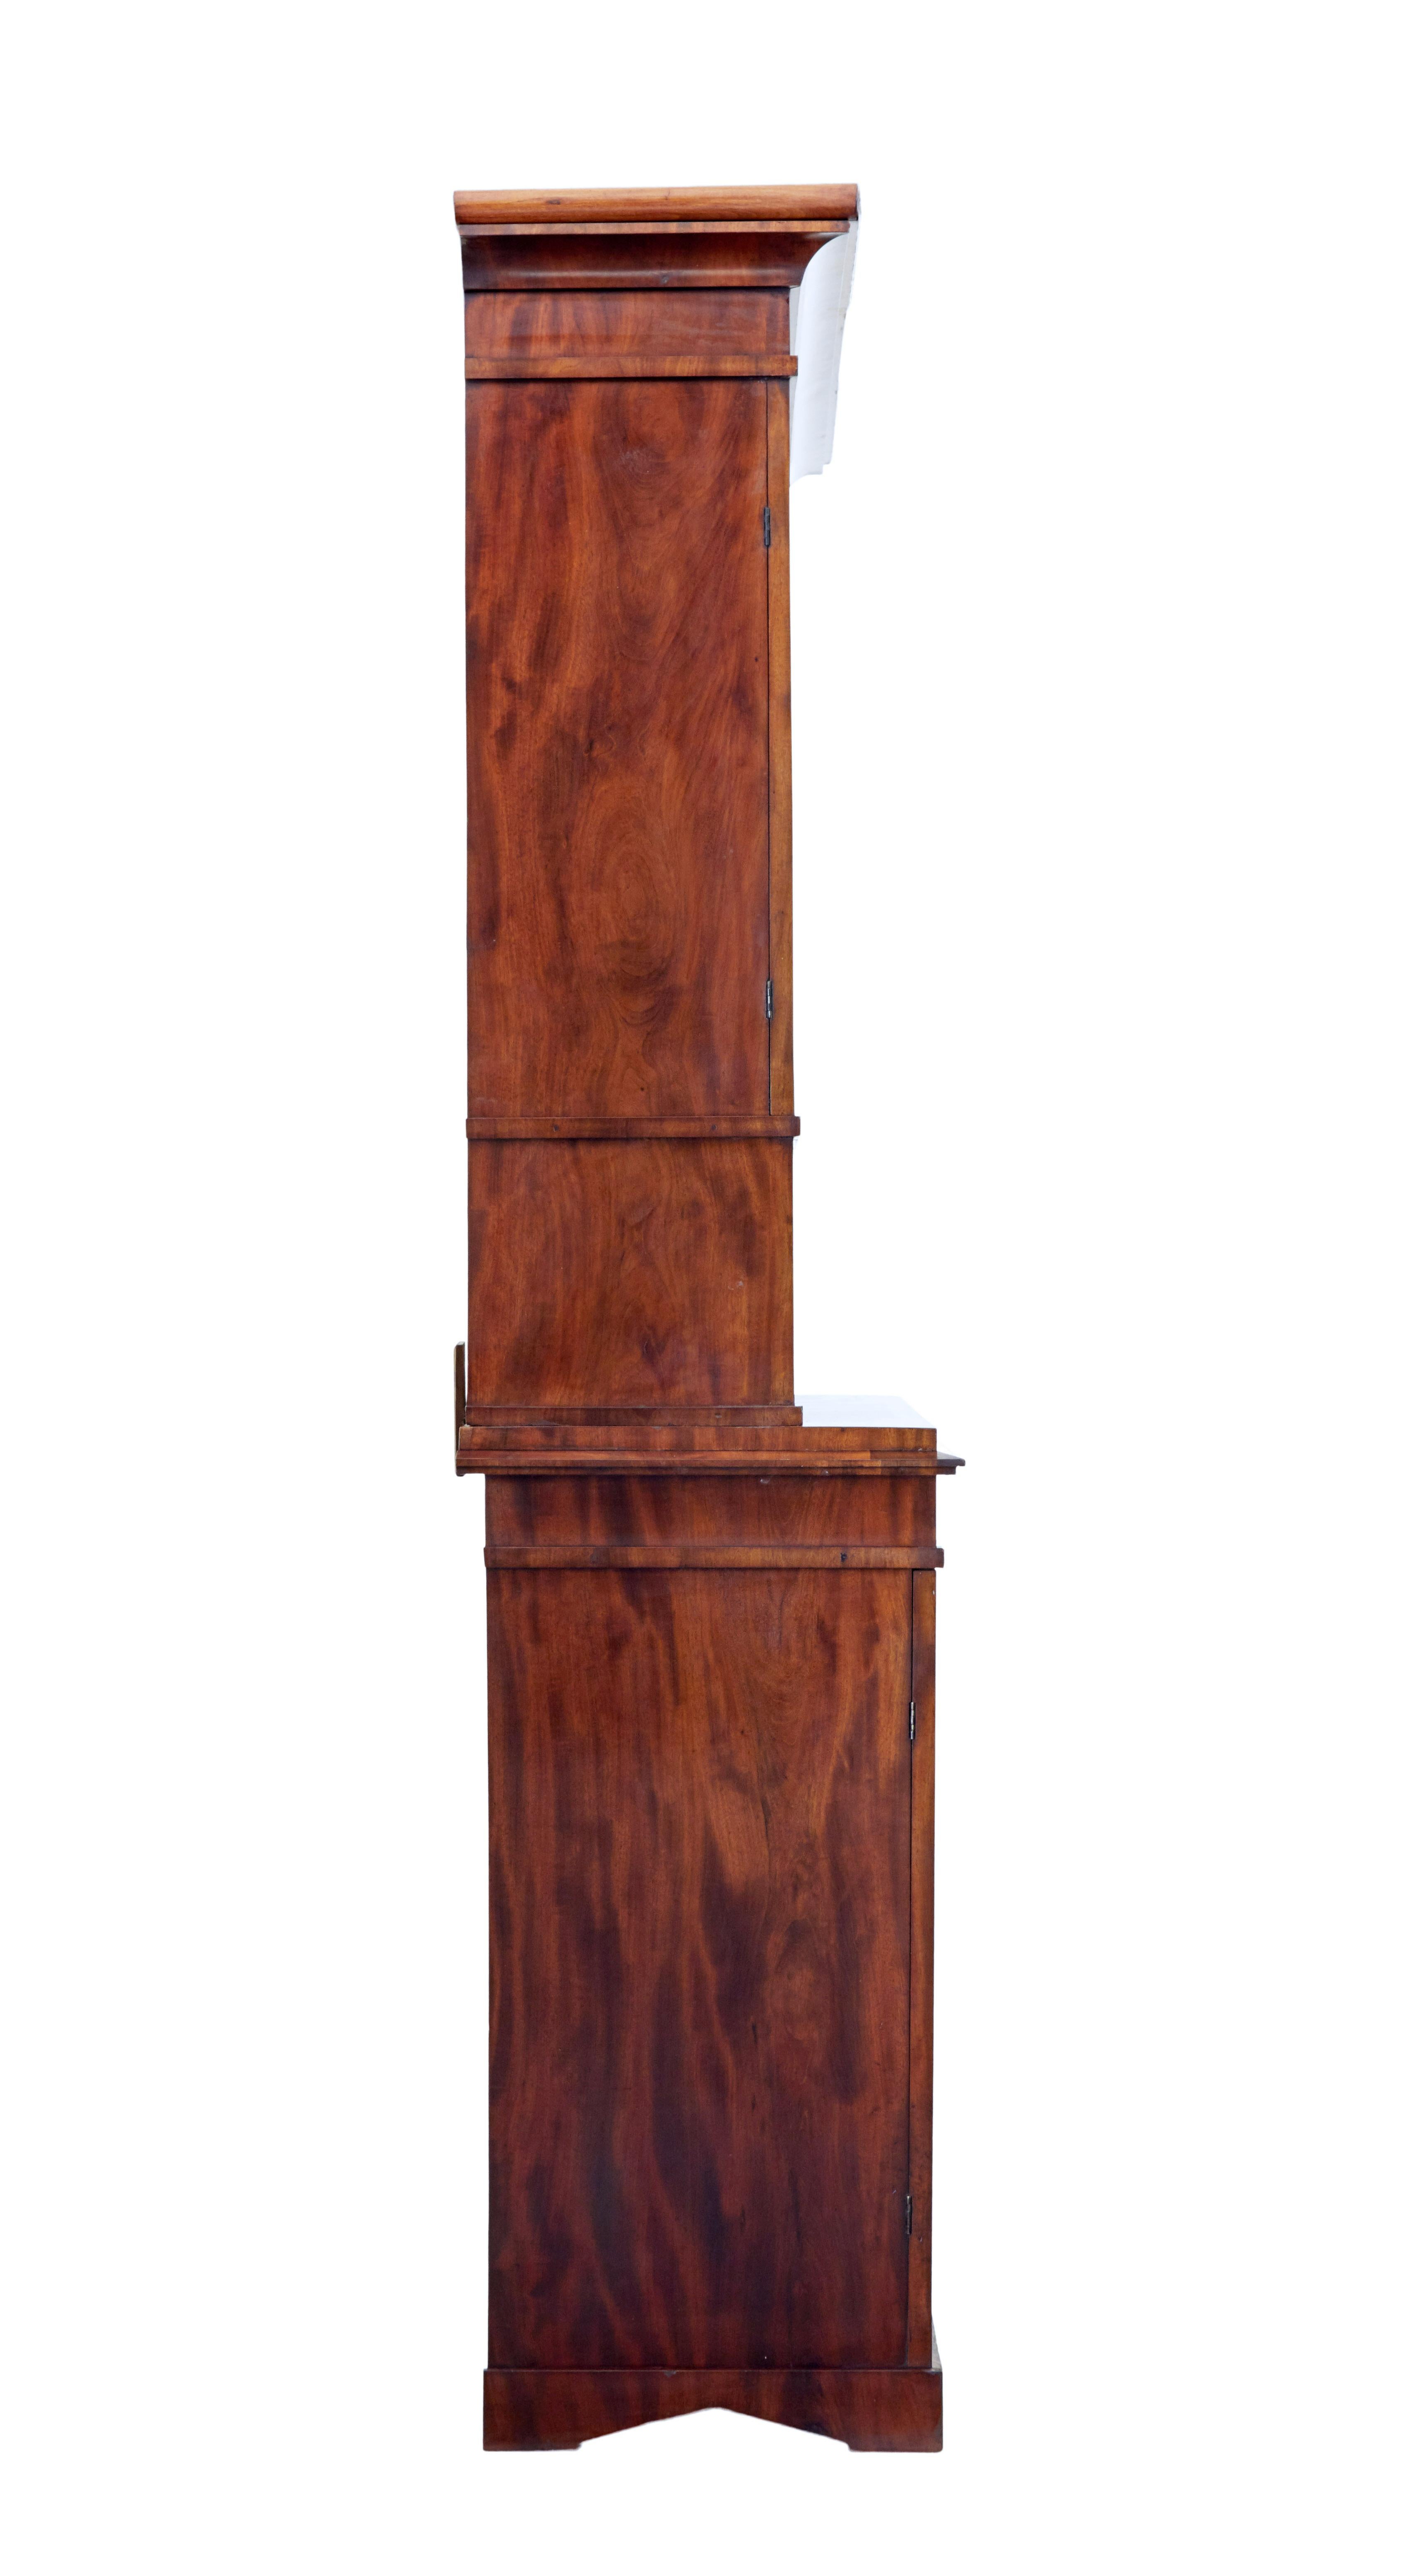 Good quality Danish 2 part tall mahogany cabinet, circa 1860.

Top section with scrolled cornice and applied swags, double doors with shaped panels open to reveal 3 adjustable pine shelves. Below this an open display aperture with further applied